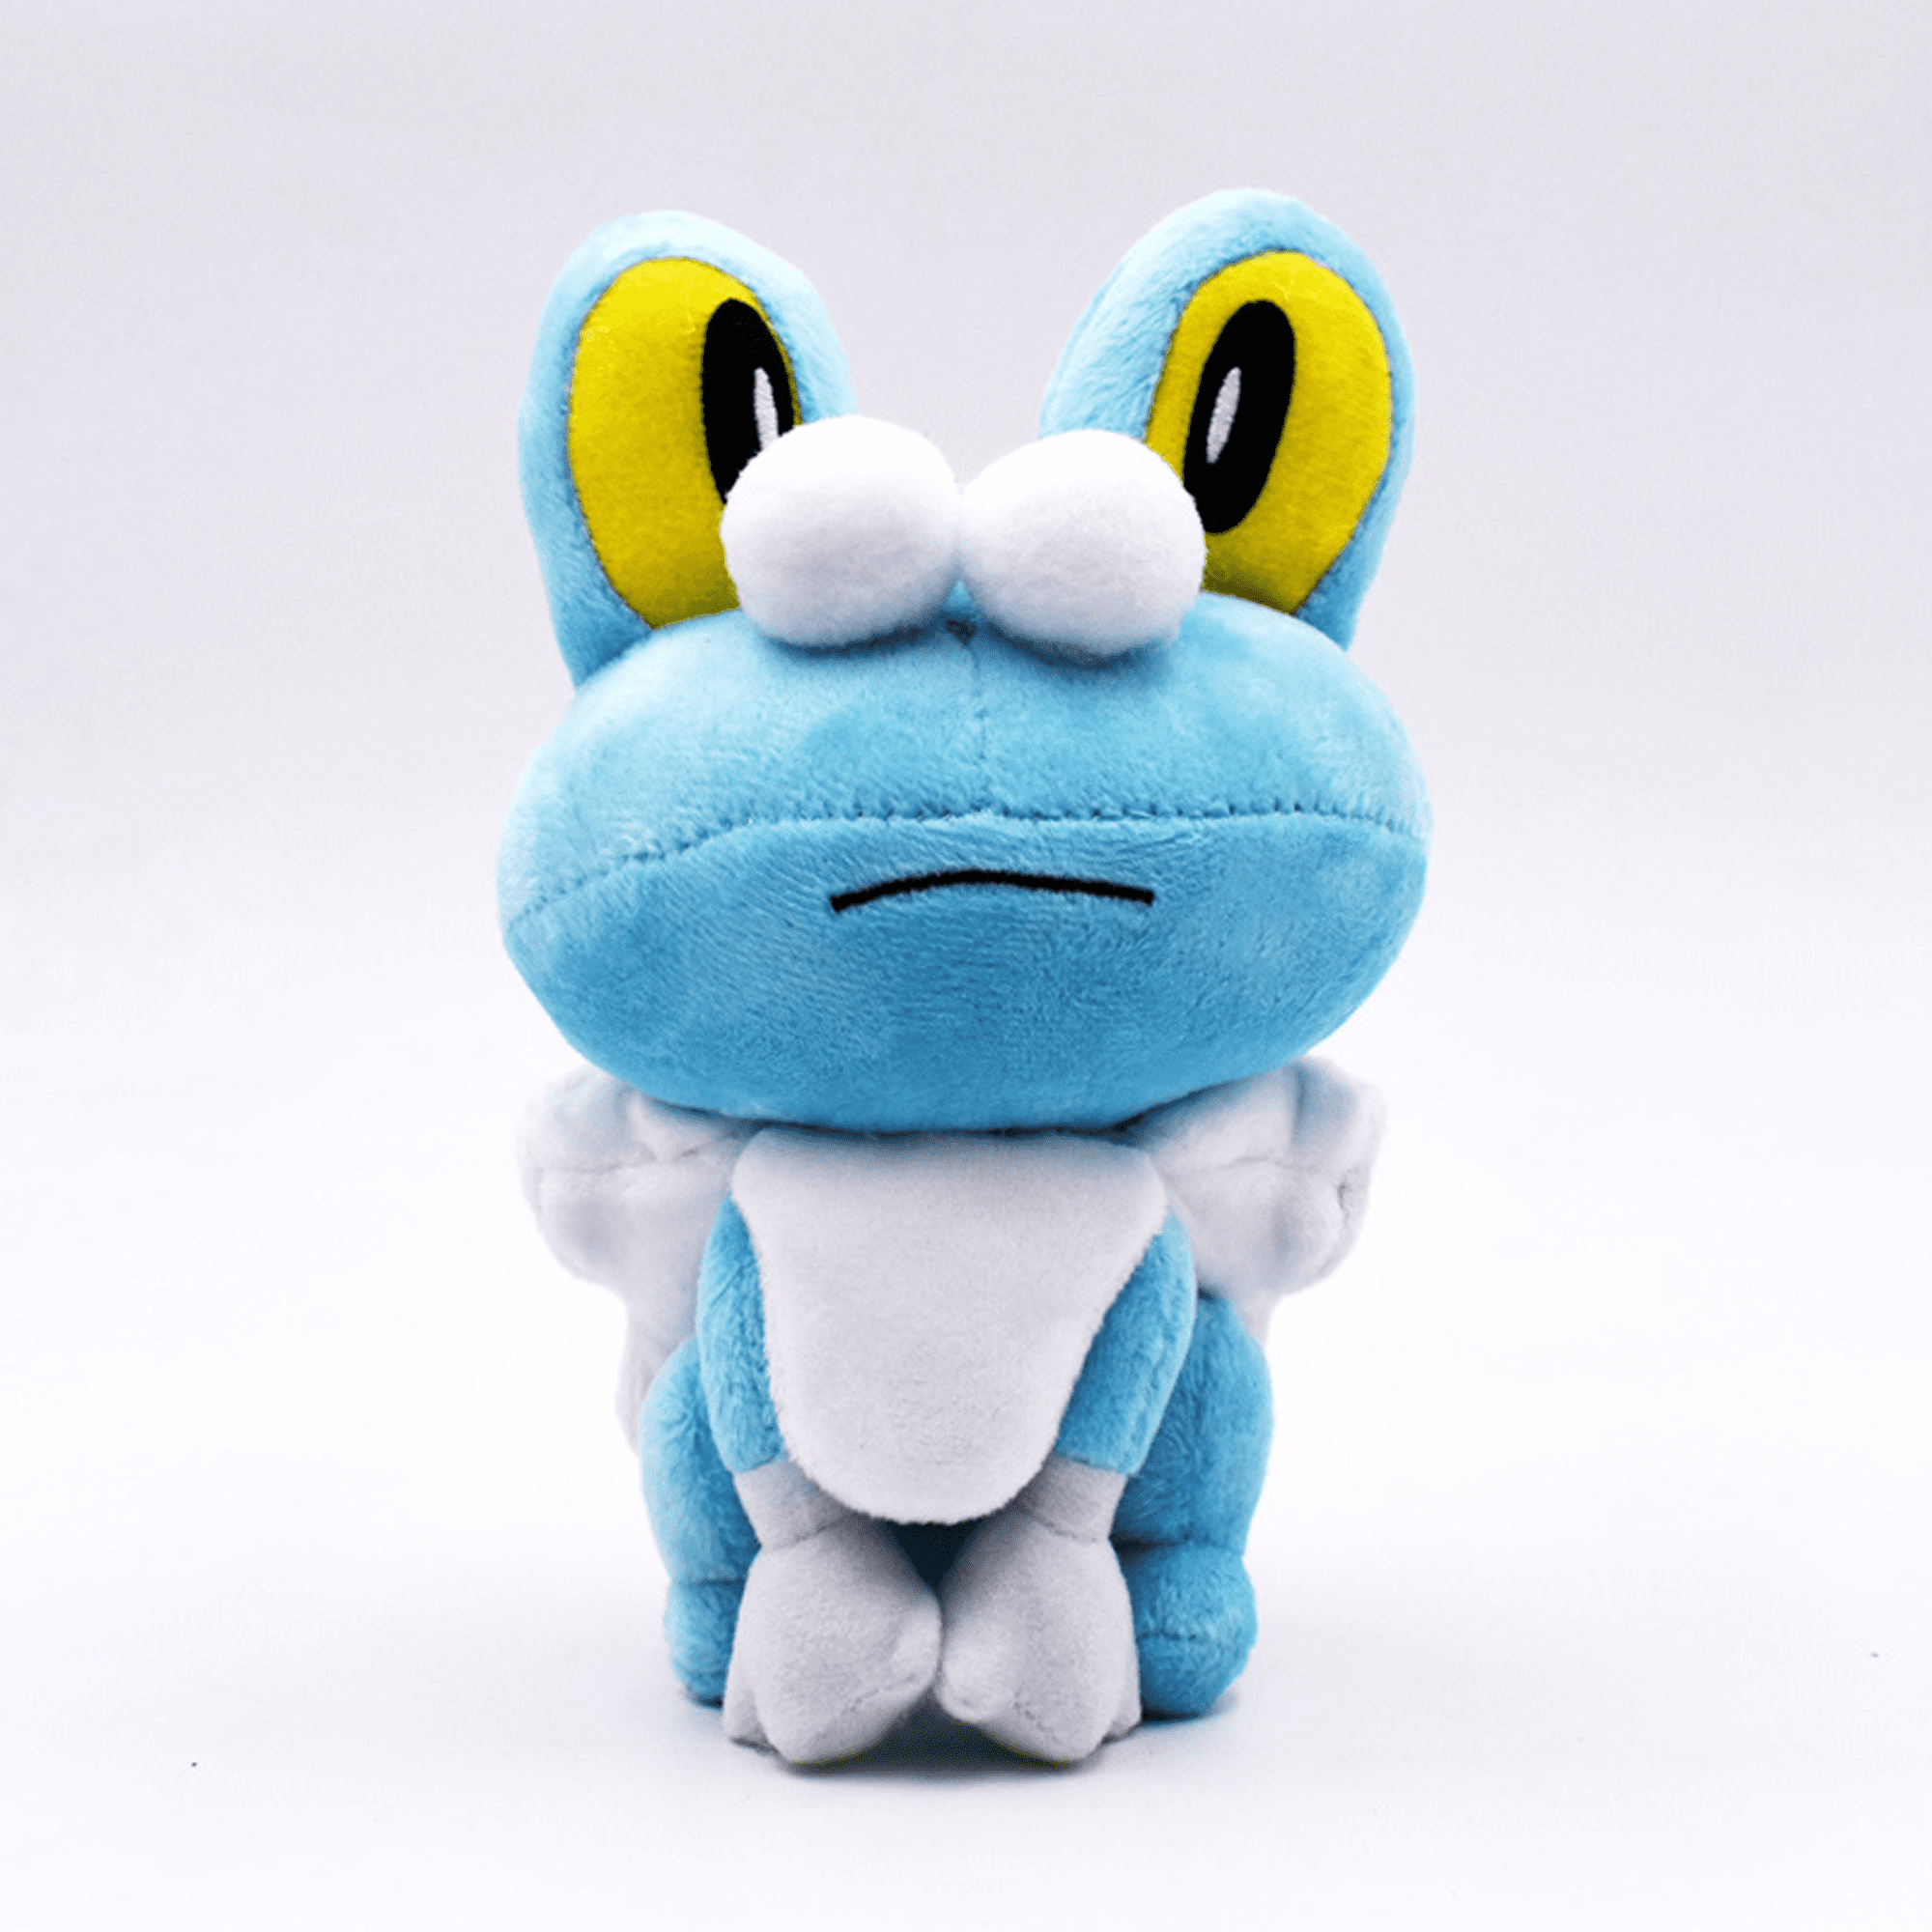 Froakie Frog Soft Plush Cuddly Doll Stuffed Toy Kids Xmas Collectible Gift 7"